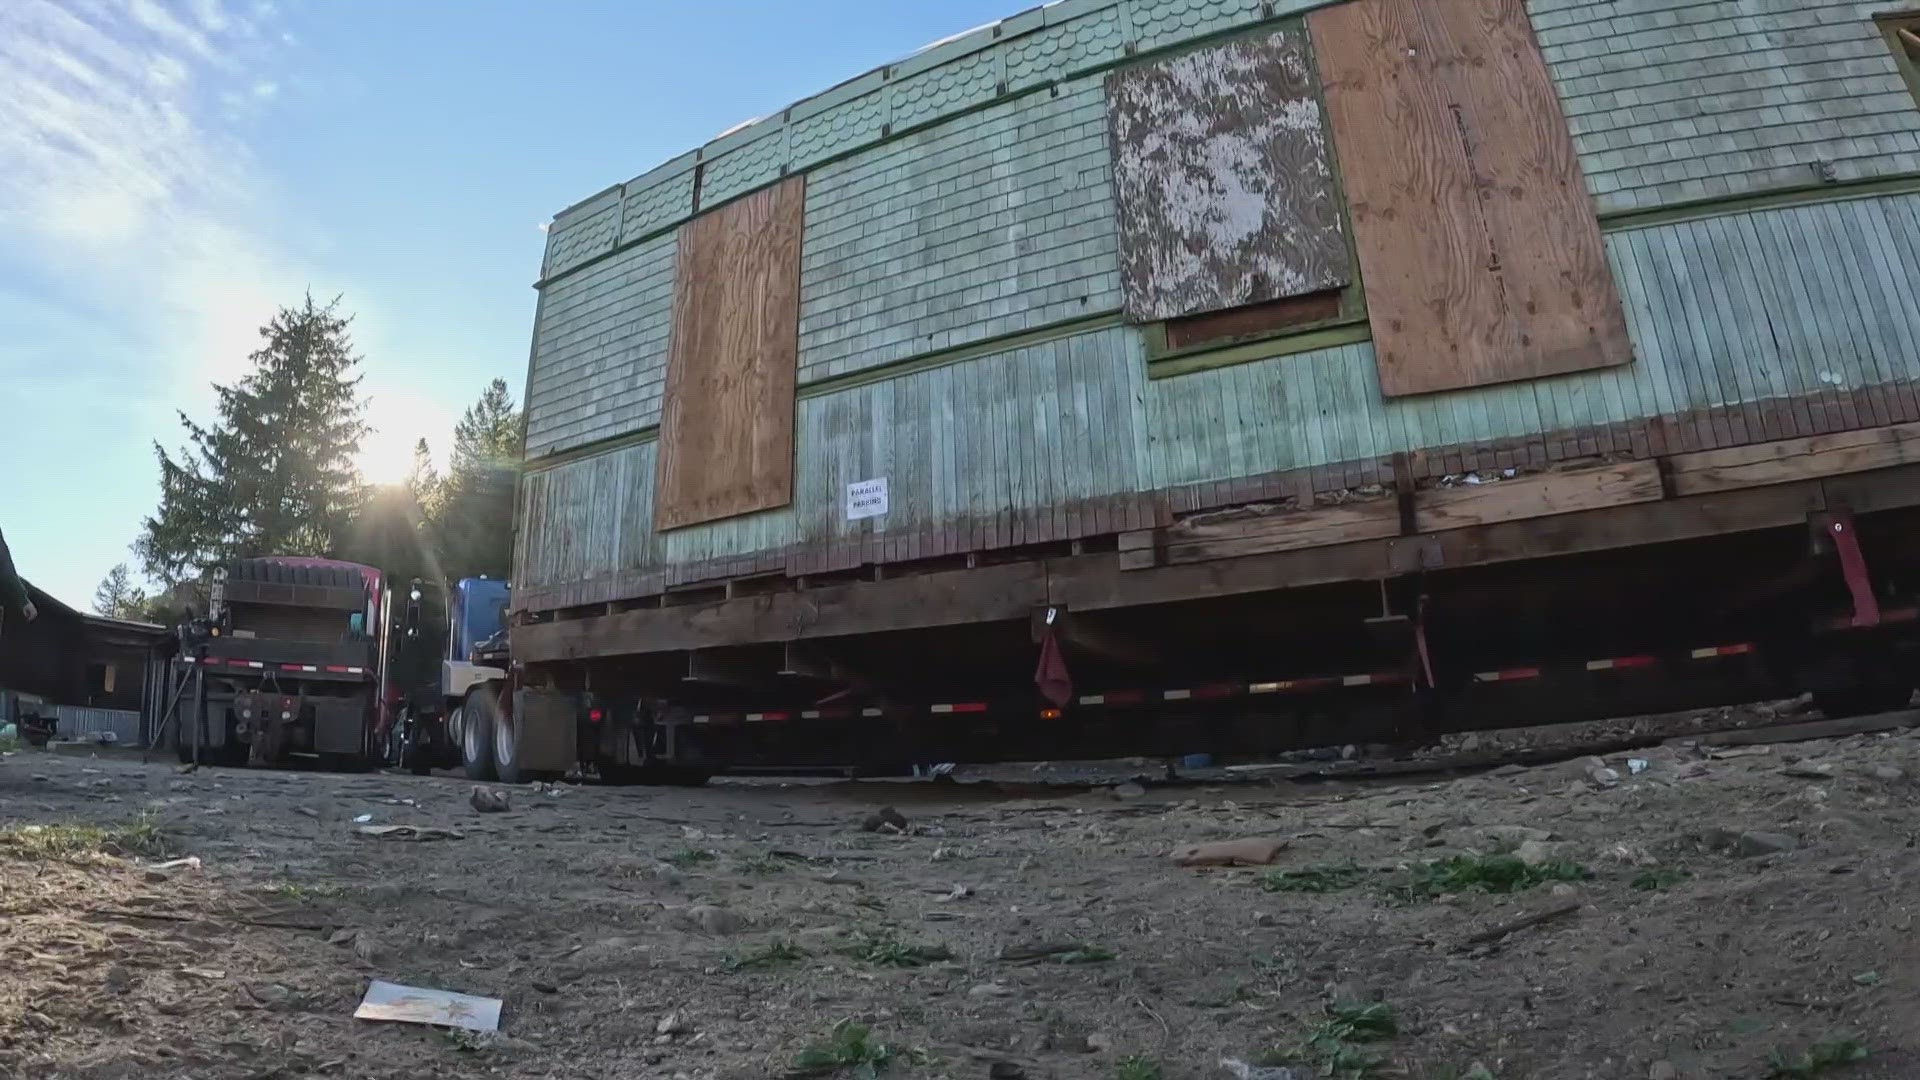 A 121-year-old train depot was moved through Colorado's mountains to a new home at the Moffat Road Railroad Museum in Granby this week.